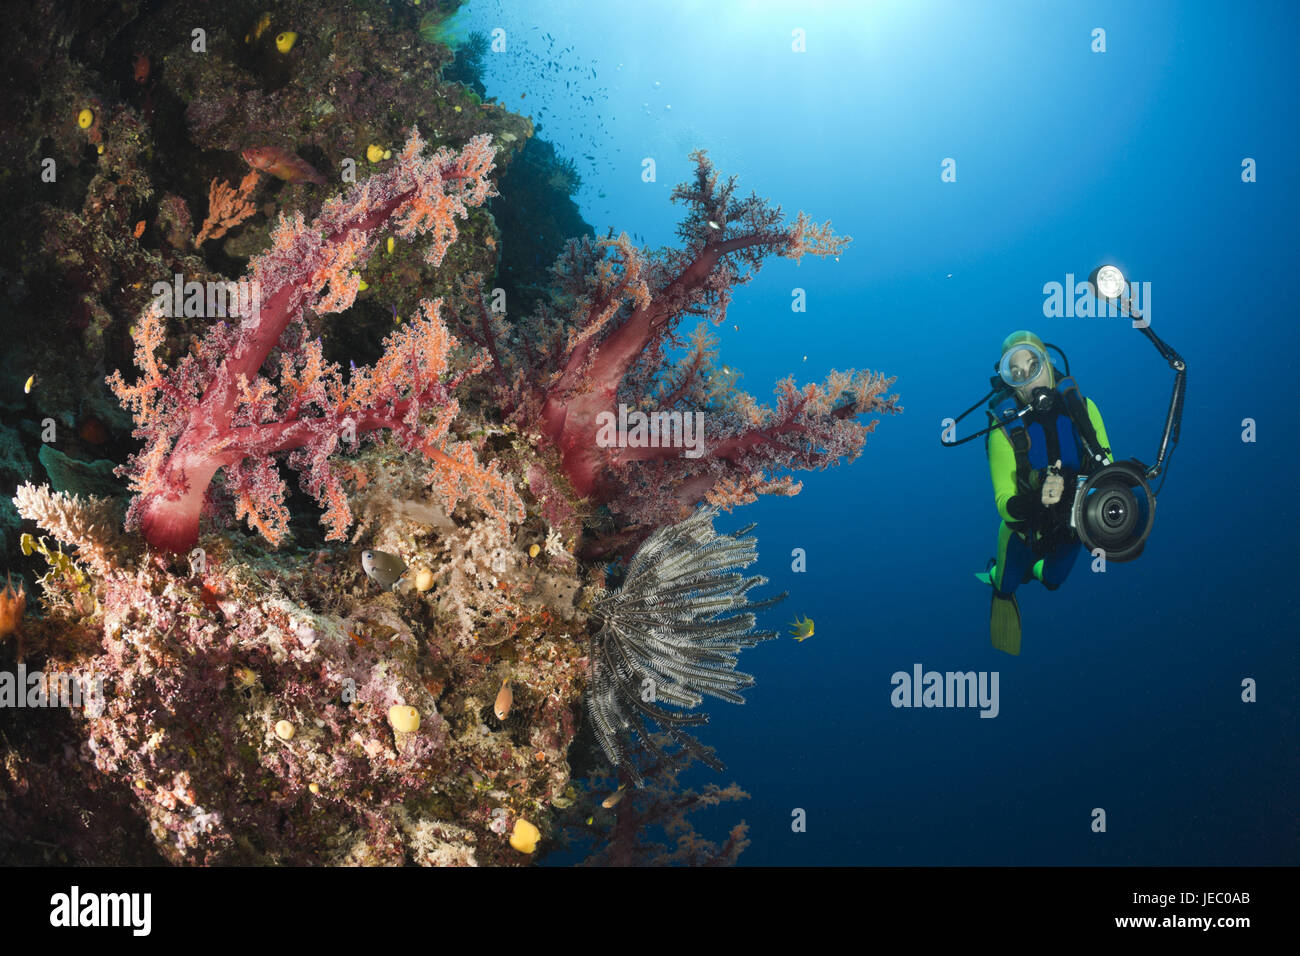 Diver and red soft corals, Dendronephthya sp., Wakaya, Lomaiviti, Fiji, Stock Photo